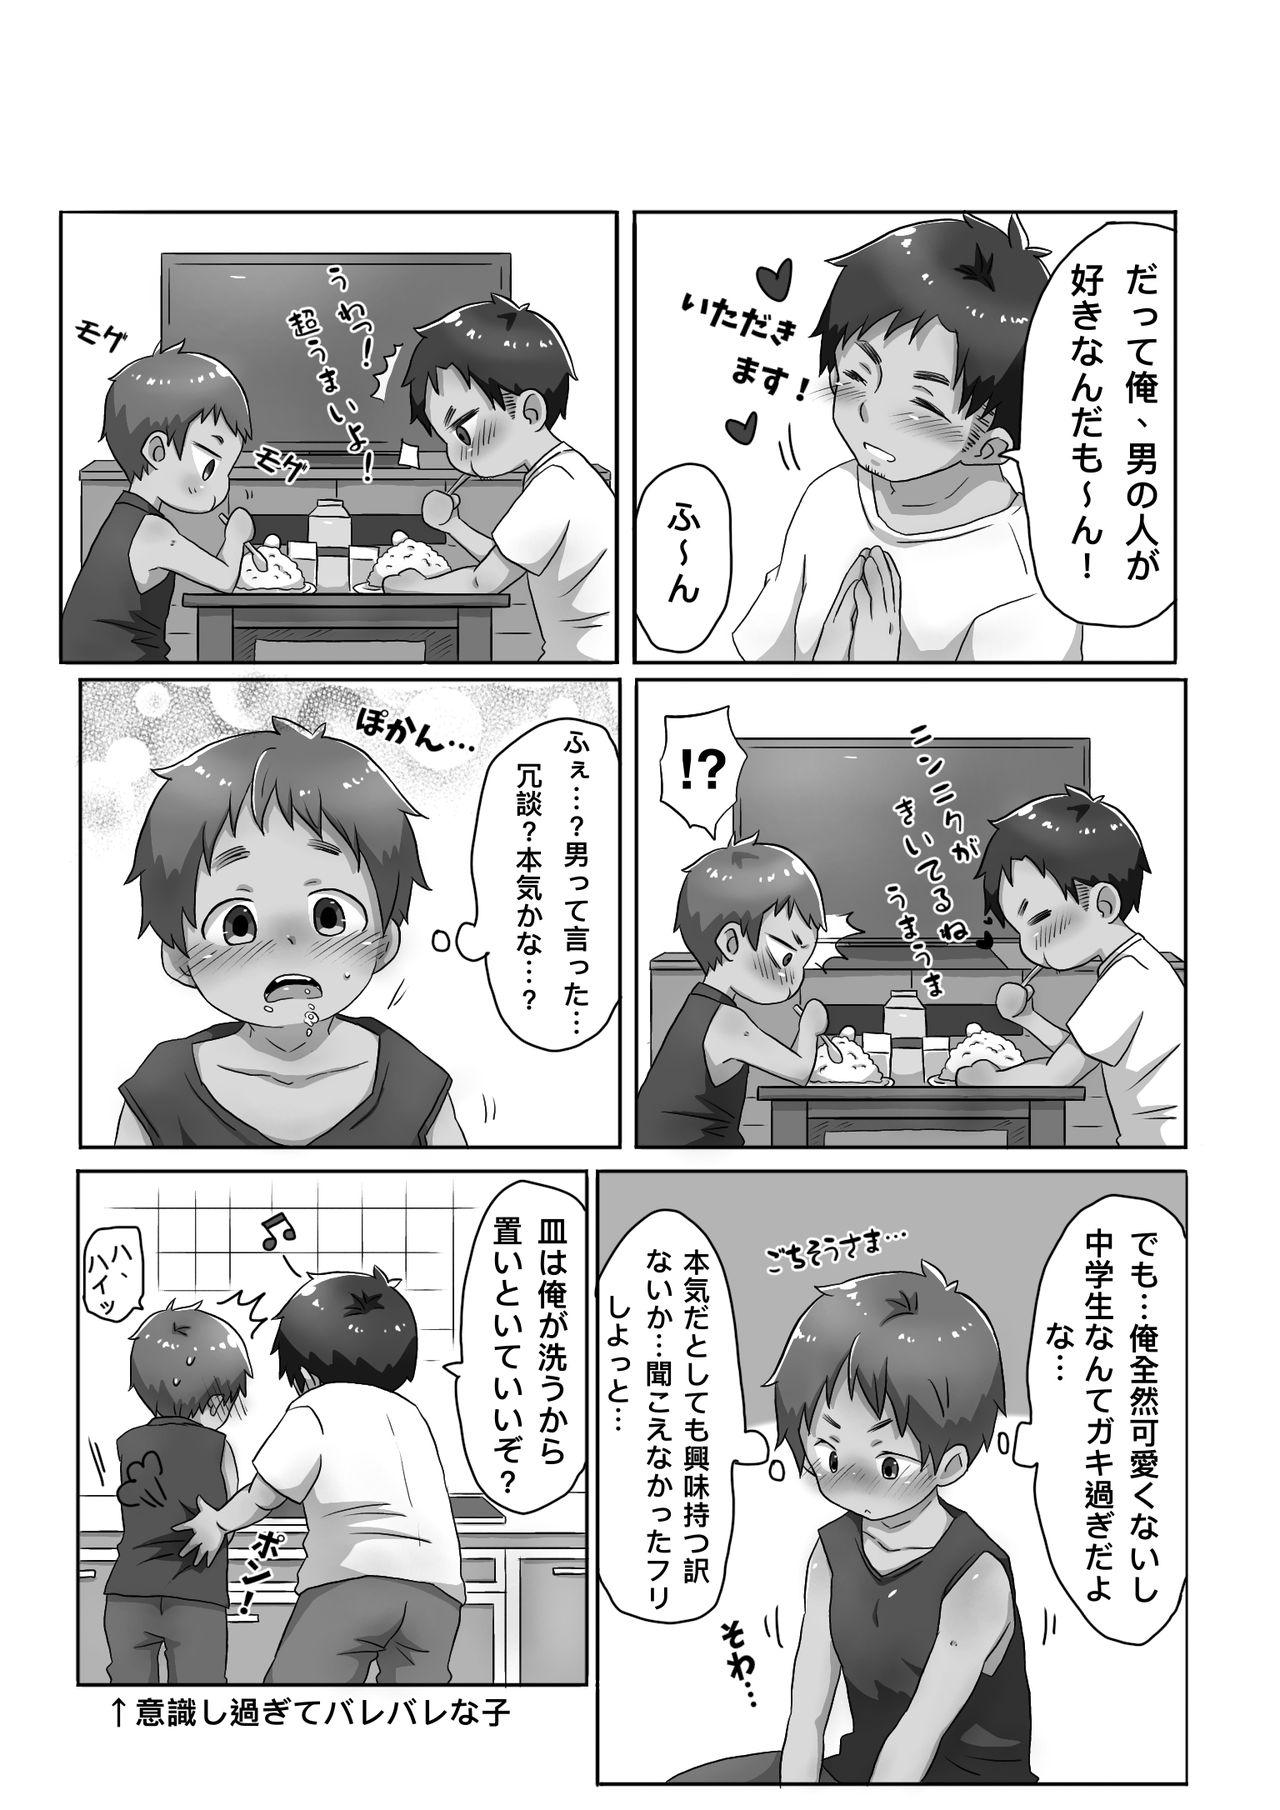 Role Play ゴロタ - 30代独身男と隣りの少年 - Original Muscular - Page 6